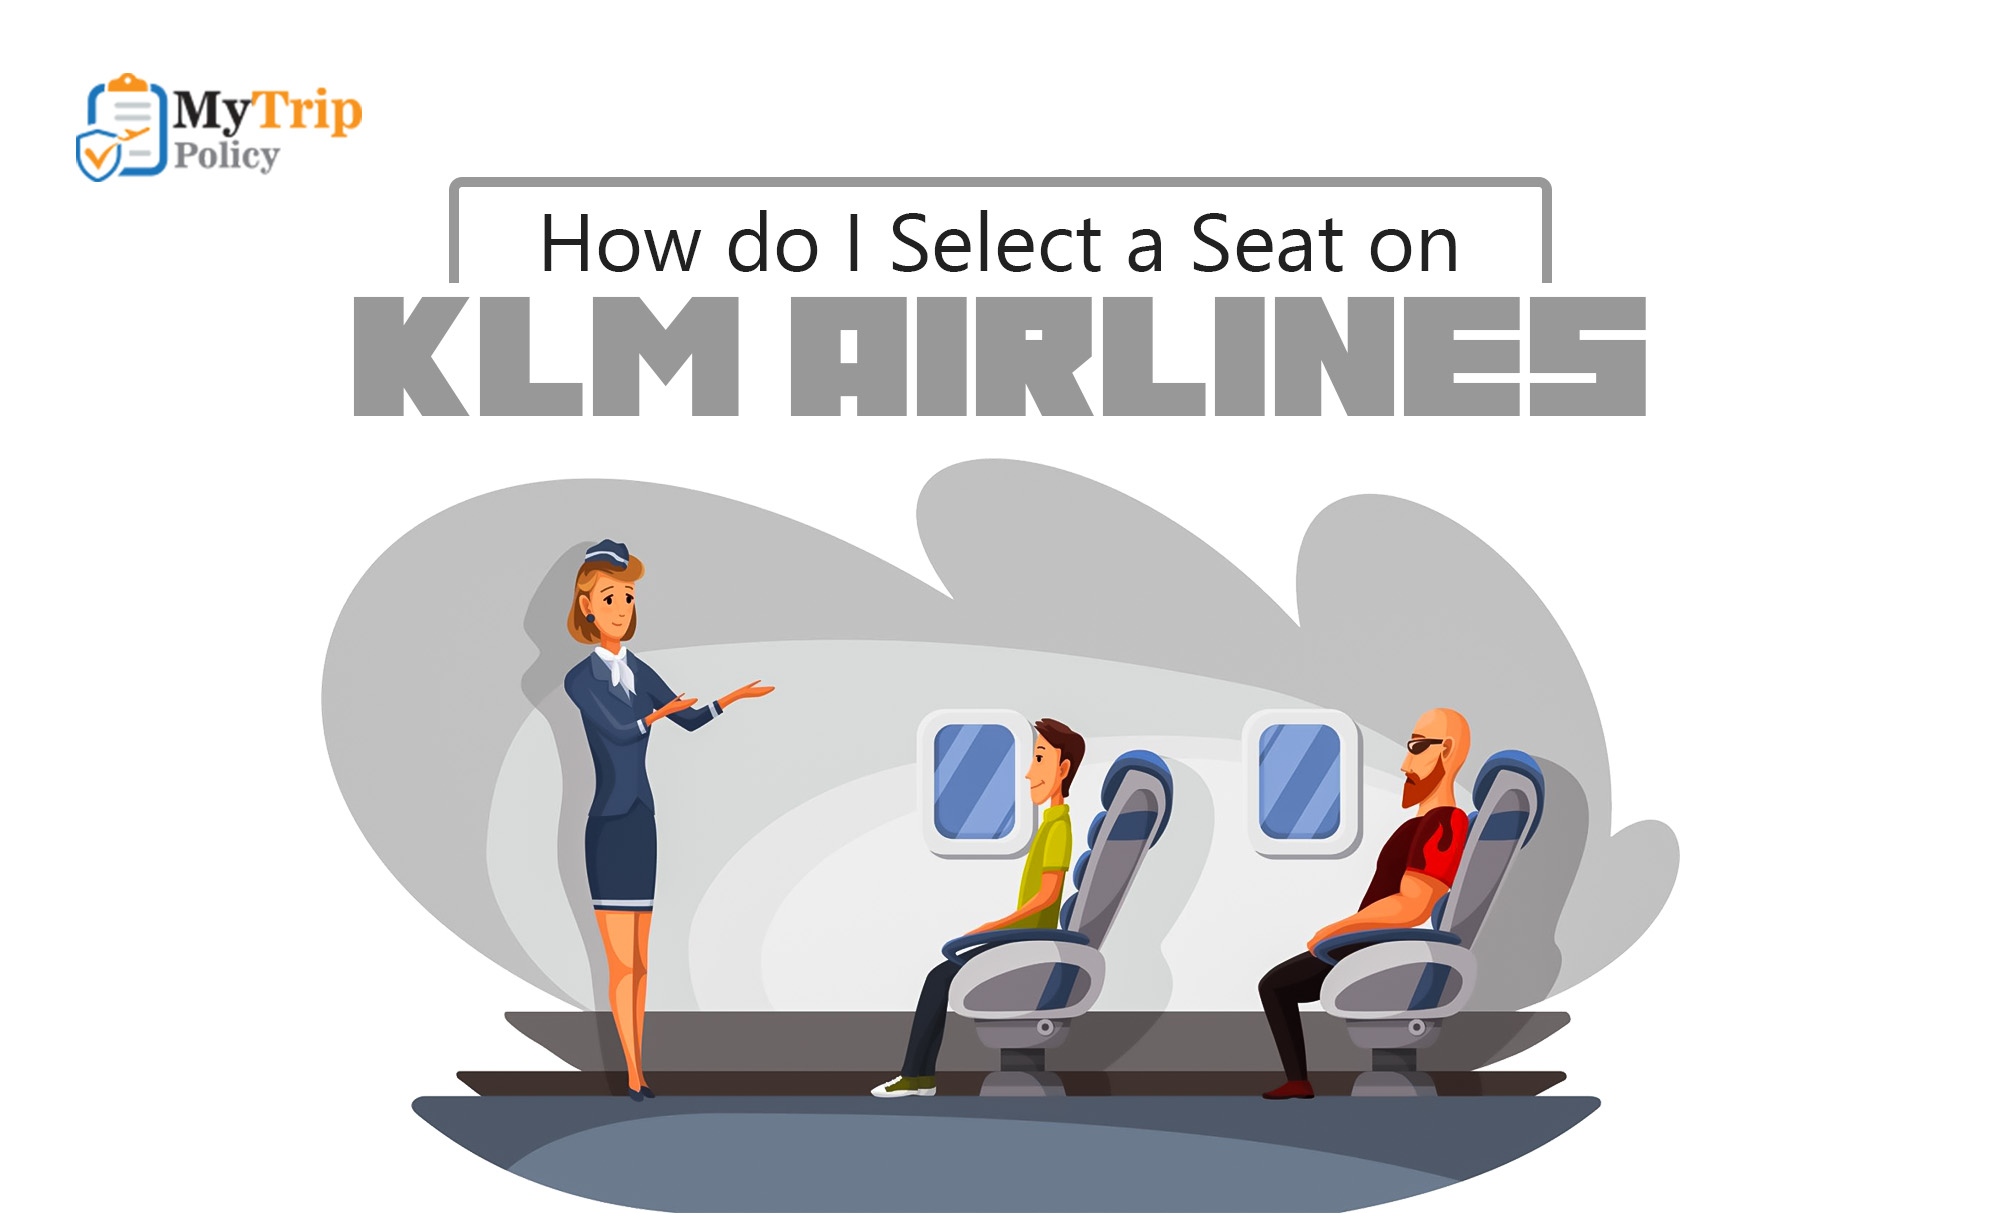 Guide on How to Choose a Seat on KLM?